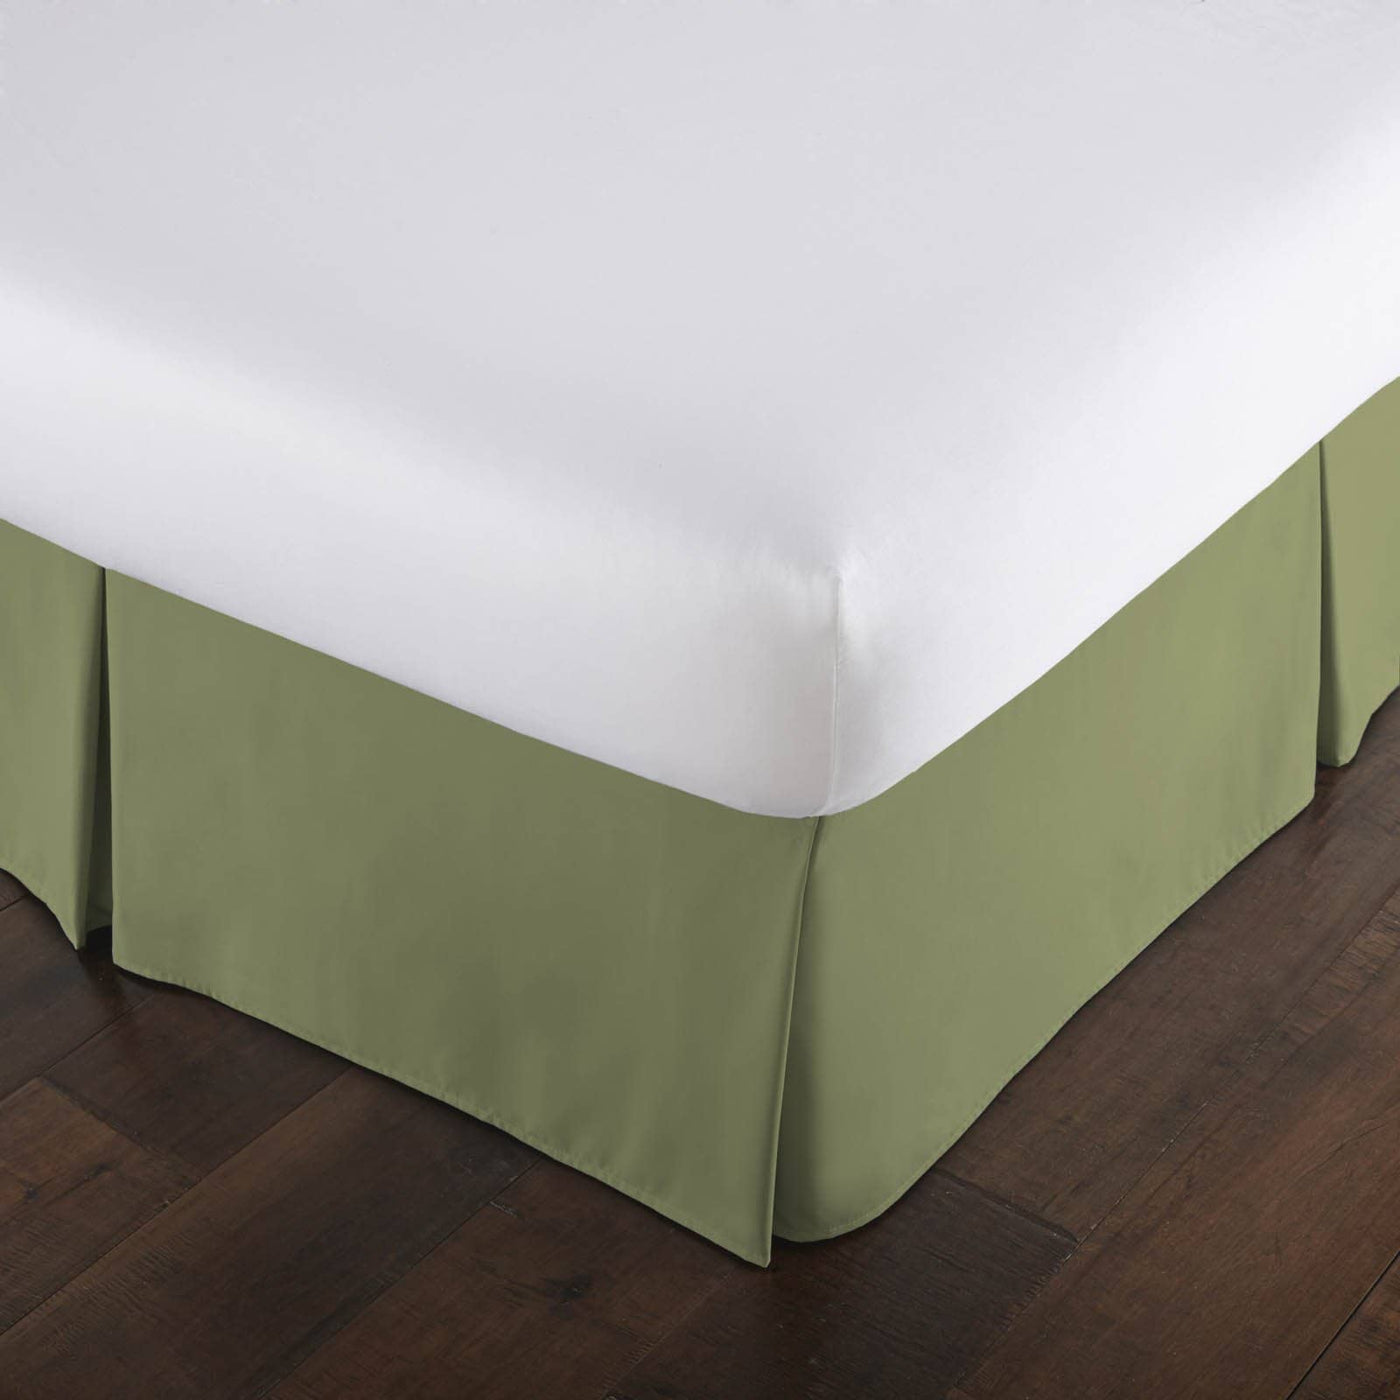 Vilano Pleated Bed Skirt in Sage Green#color_vilano-sage-green